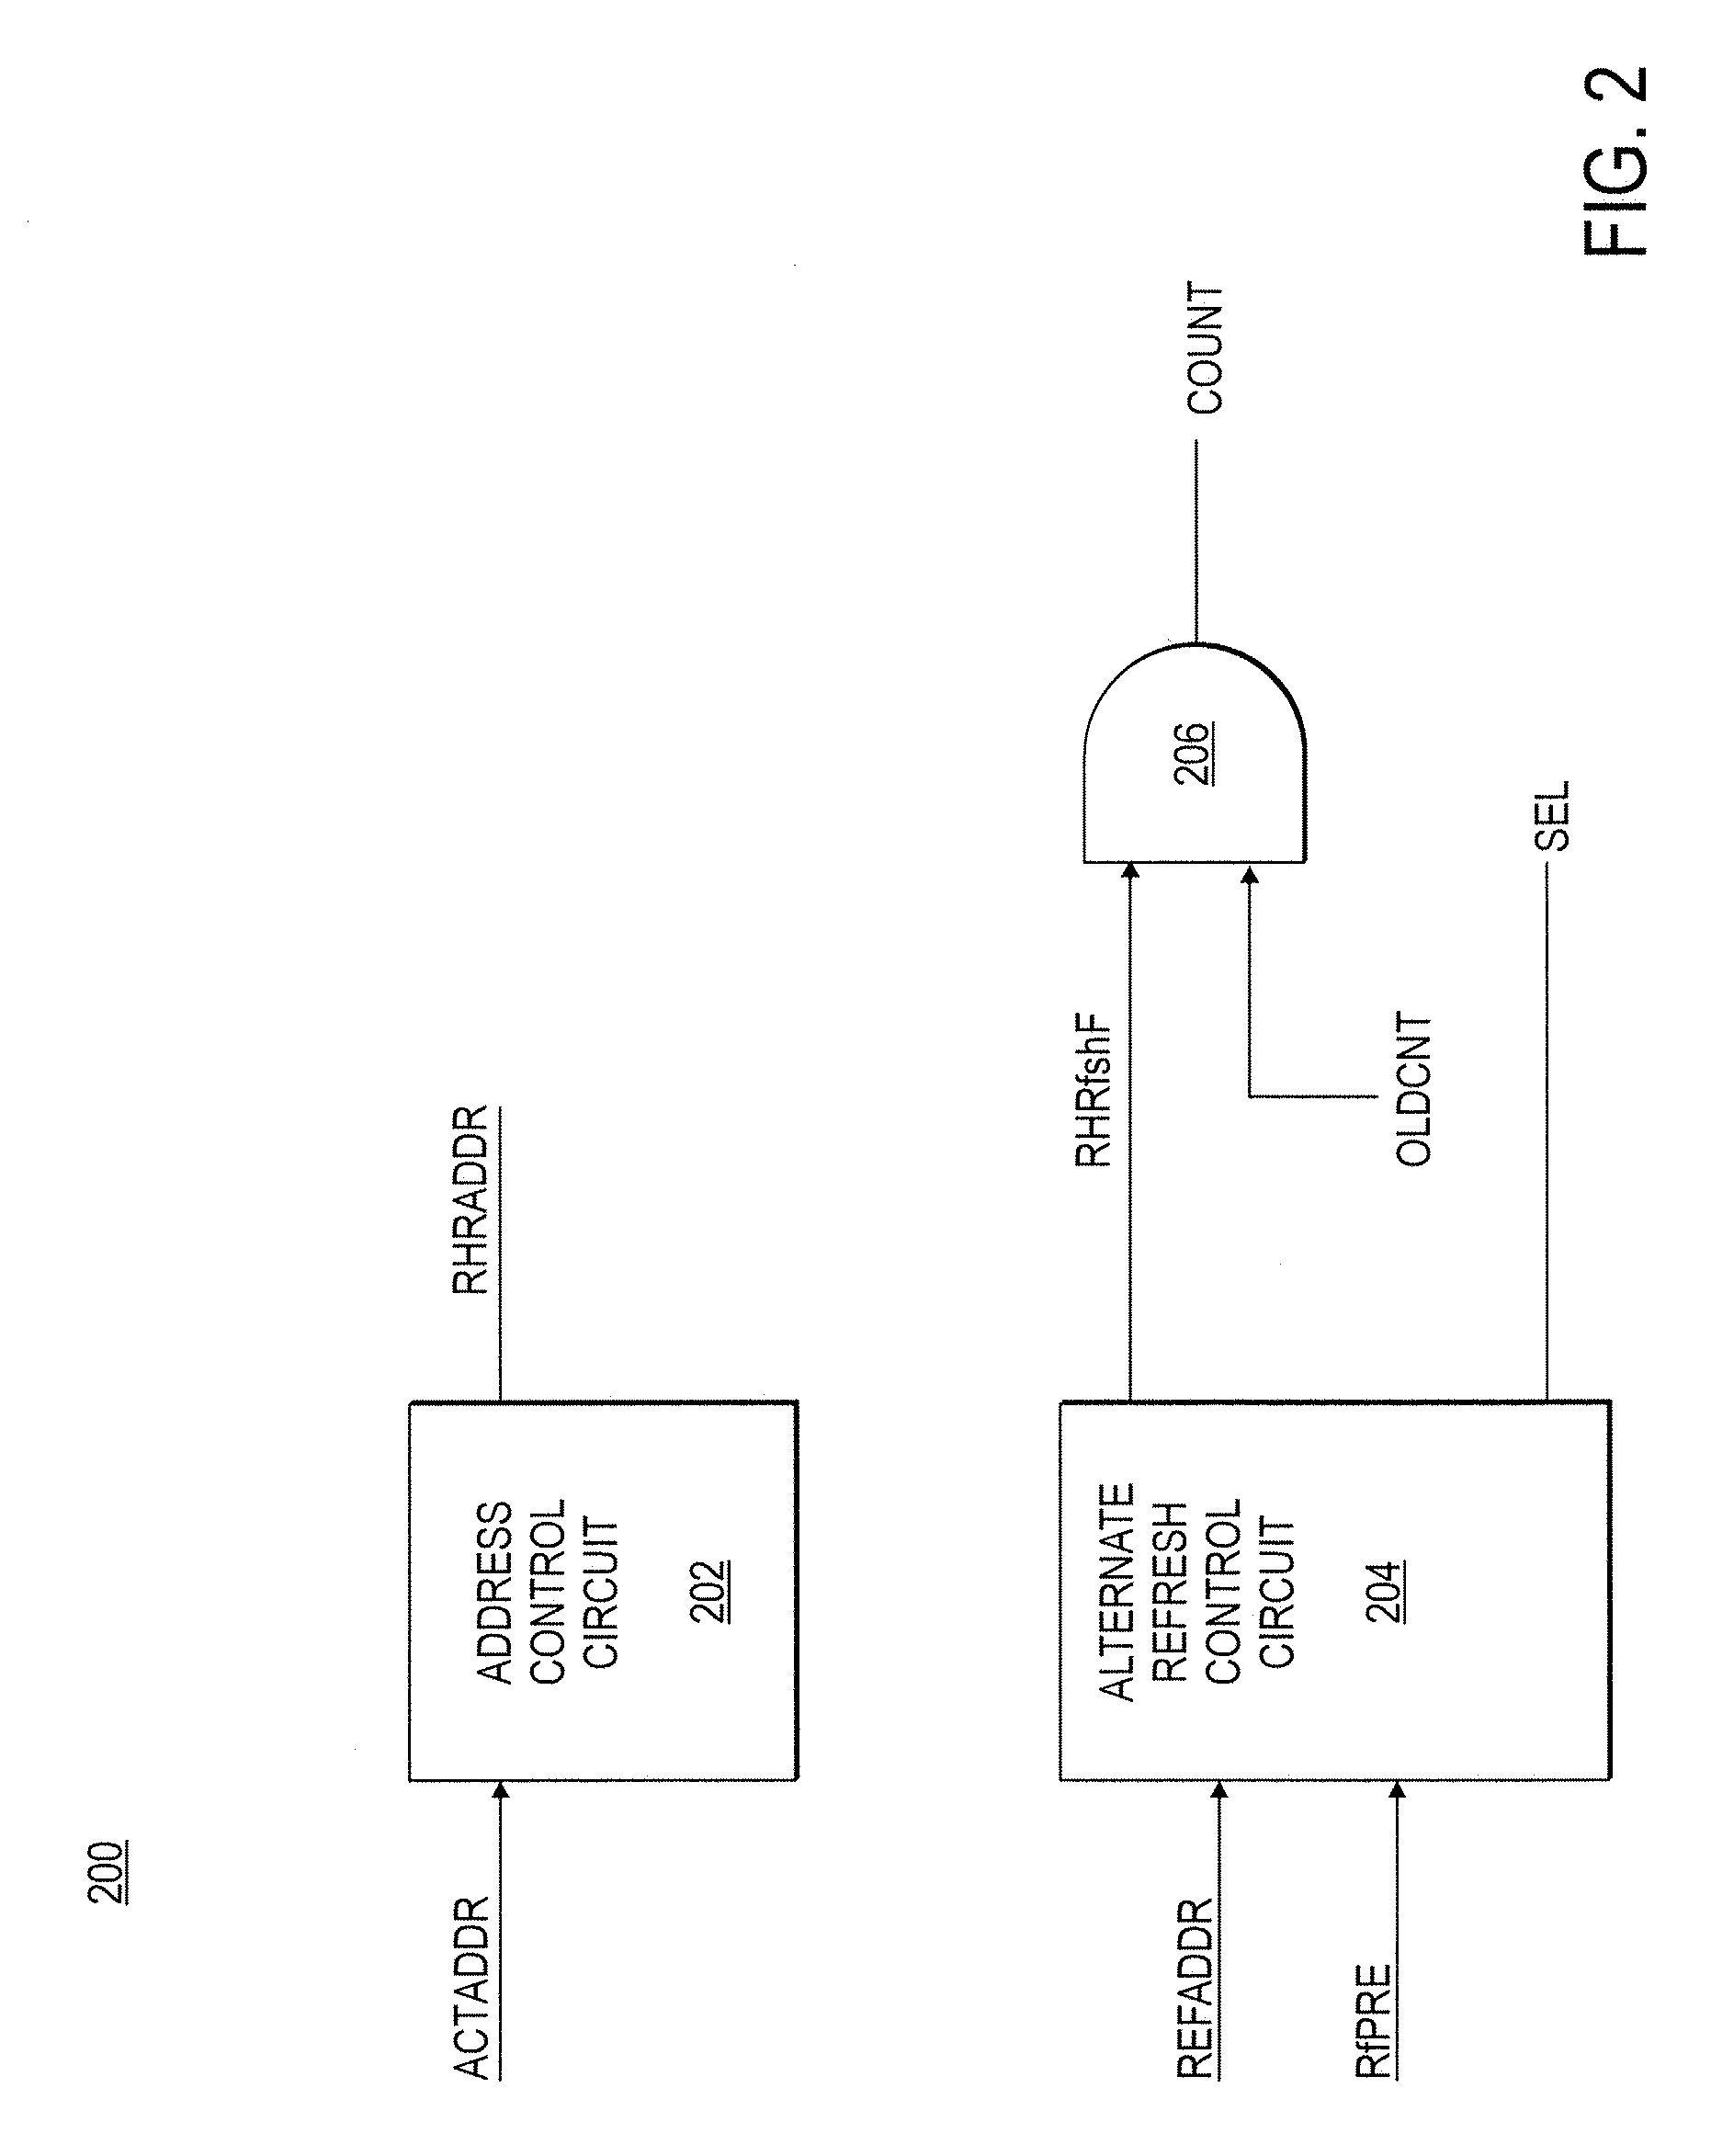 Apparatuses and methods for selective row refreshes